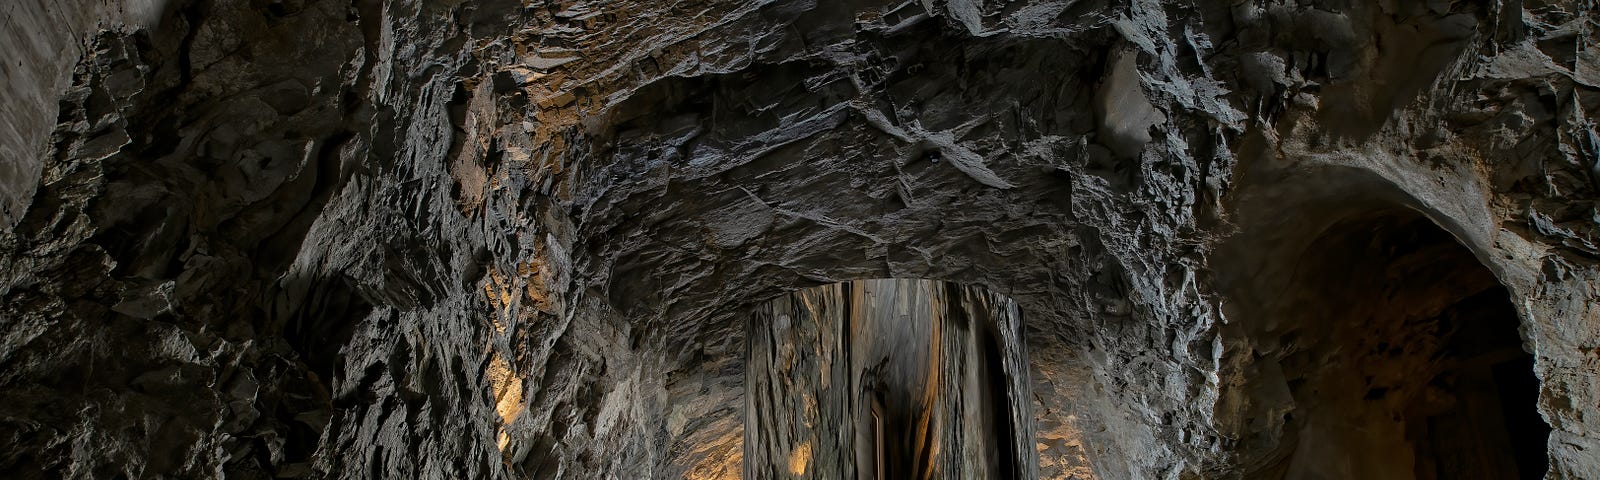 image of a cave